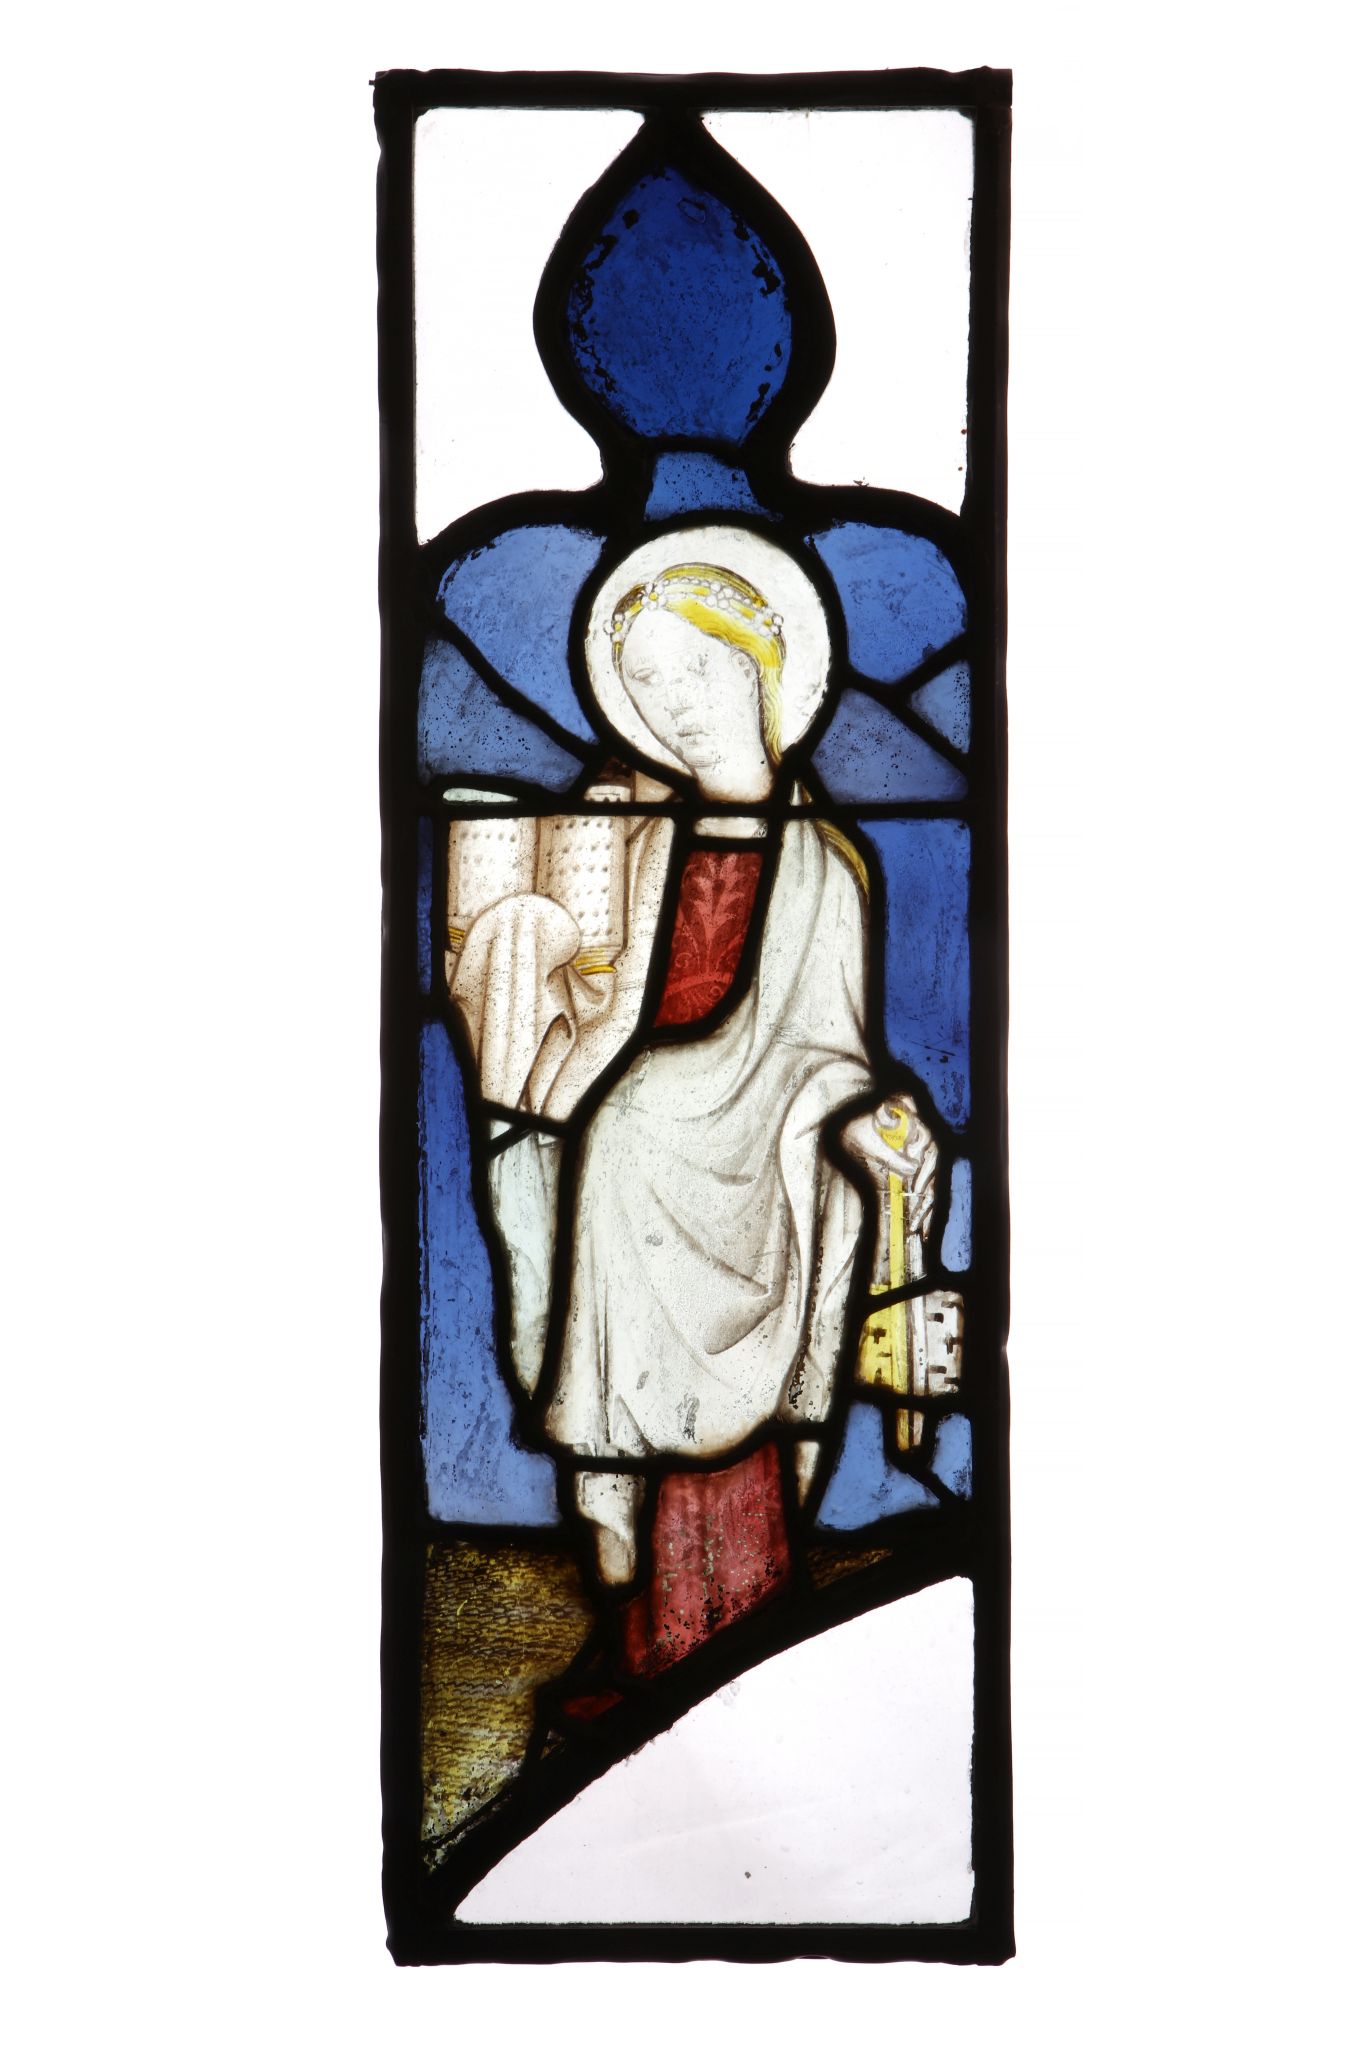 A 15TH CENTURY ENGLISH STAINED GLASS PANEL DEPICTING A FEMALE SAINT wearing a headdress of daisies